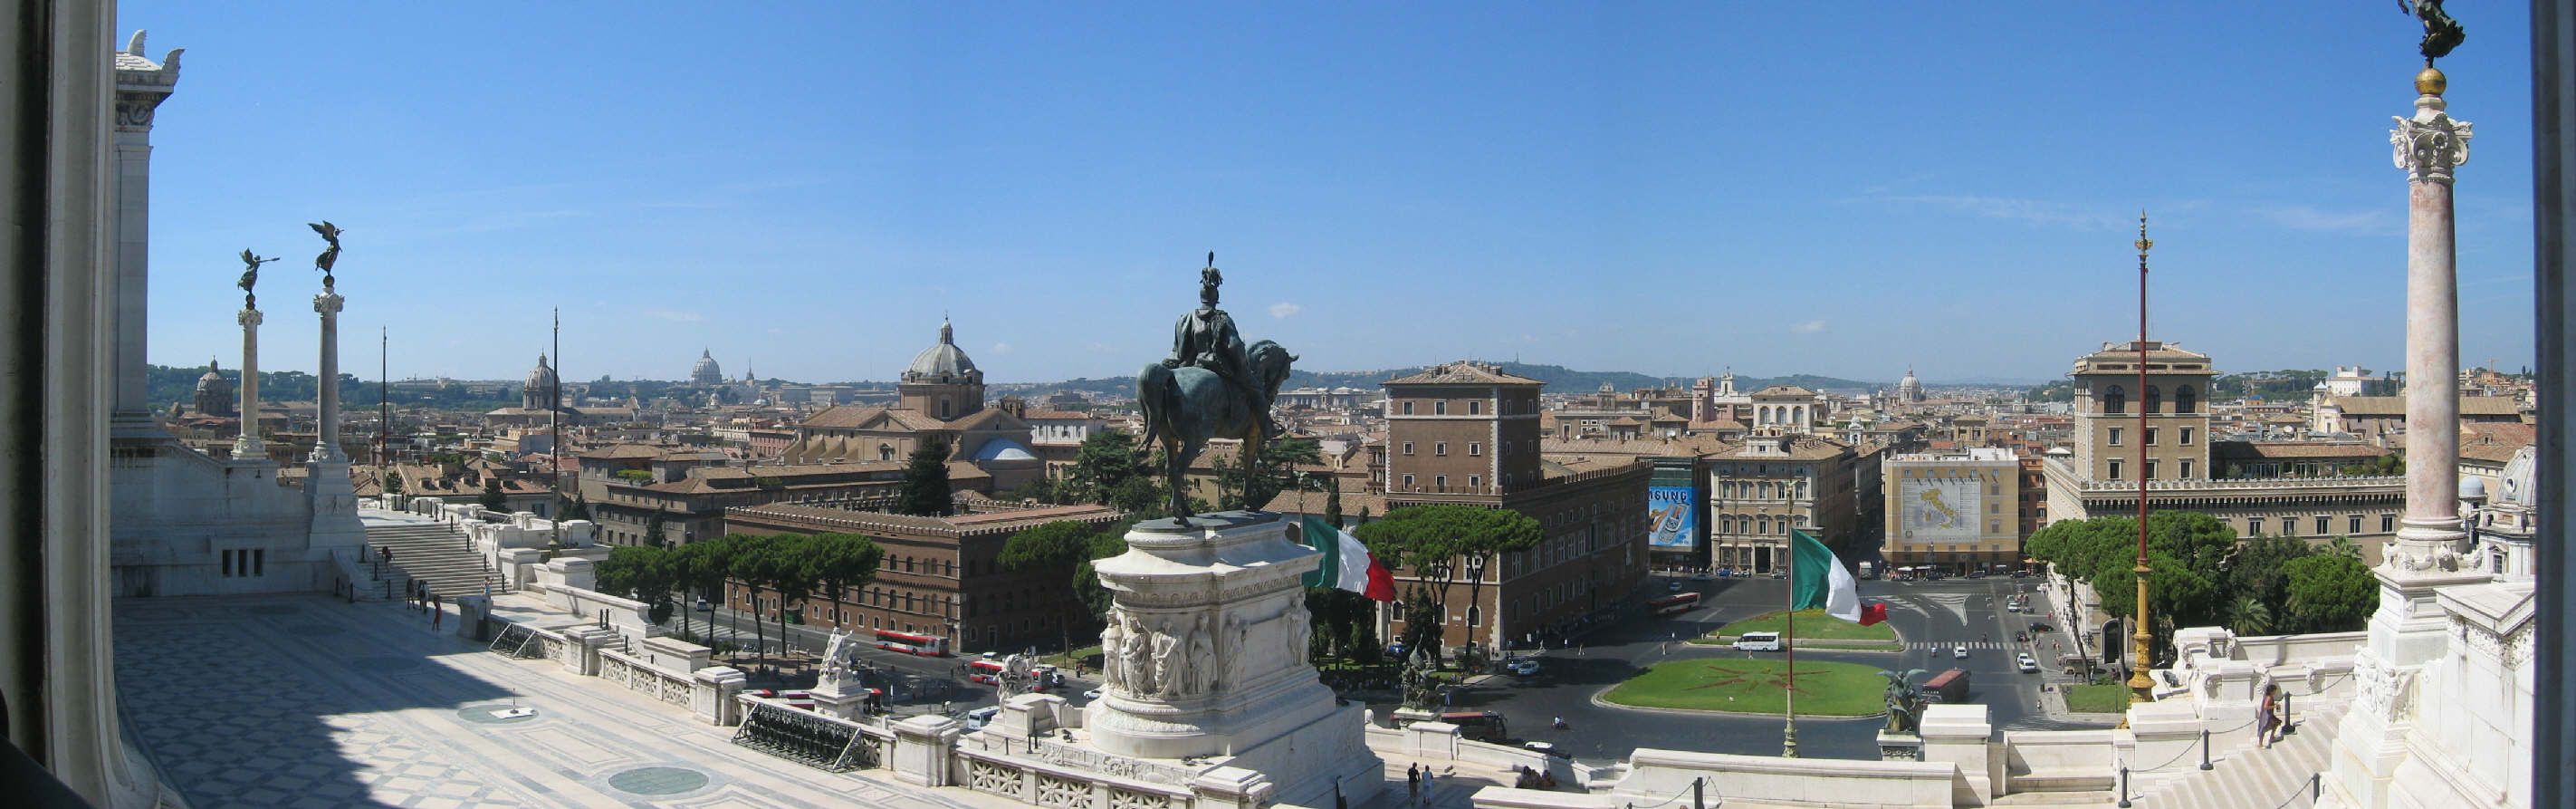 View from Vittoriano (2), Rome, Italy